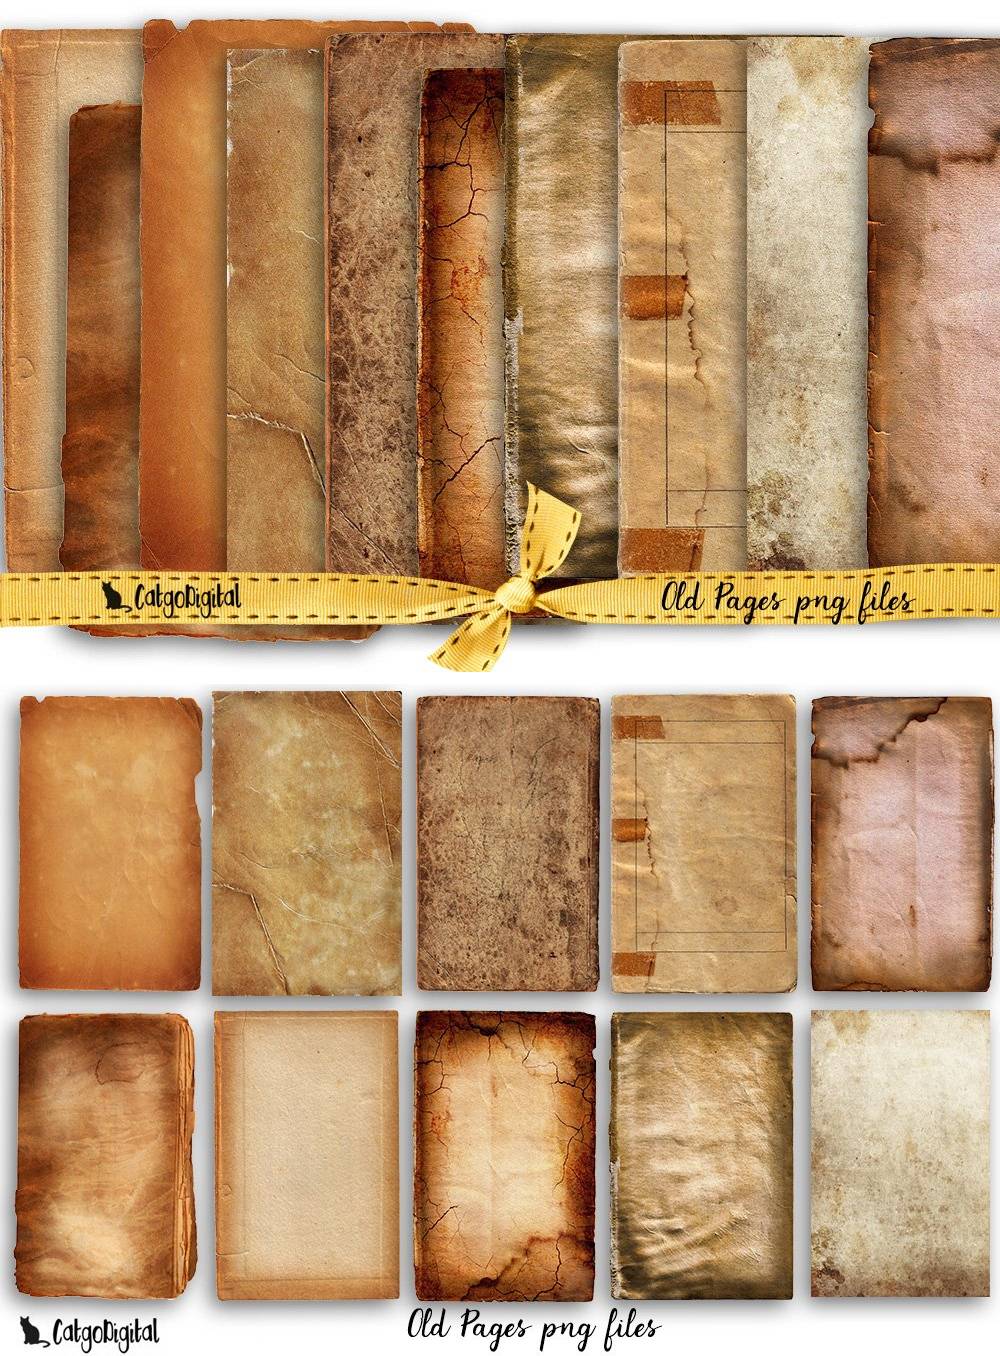 Old Pages Grunge Paper Texture PNG - Pinterest.